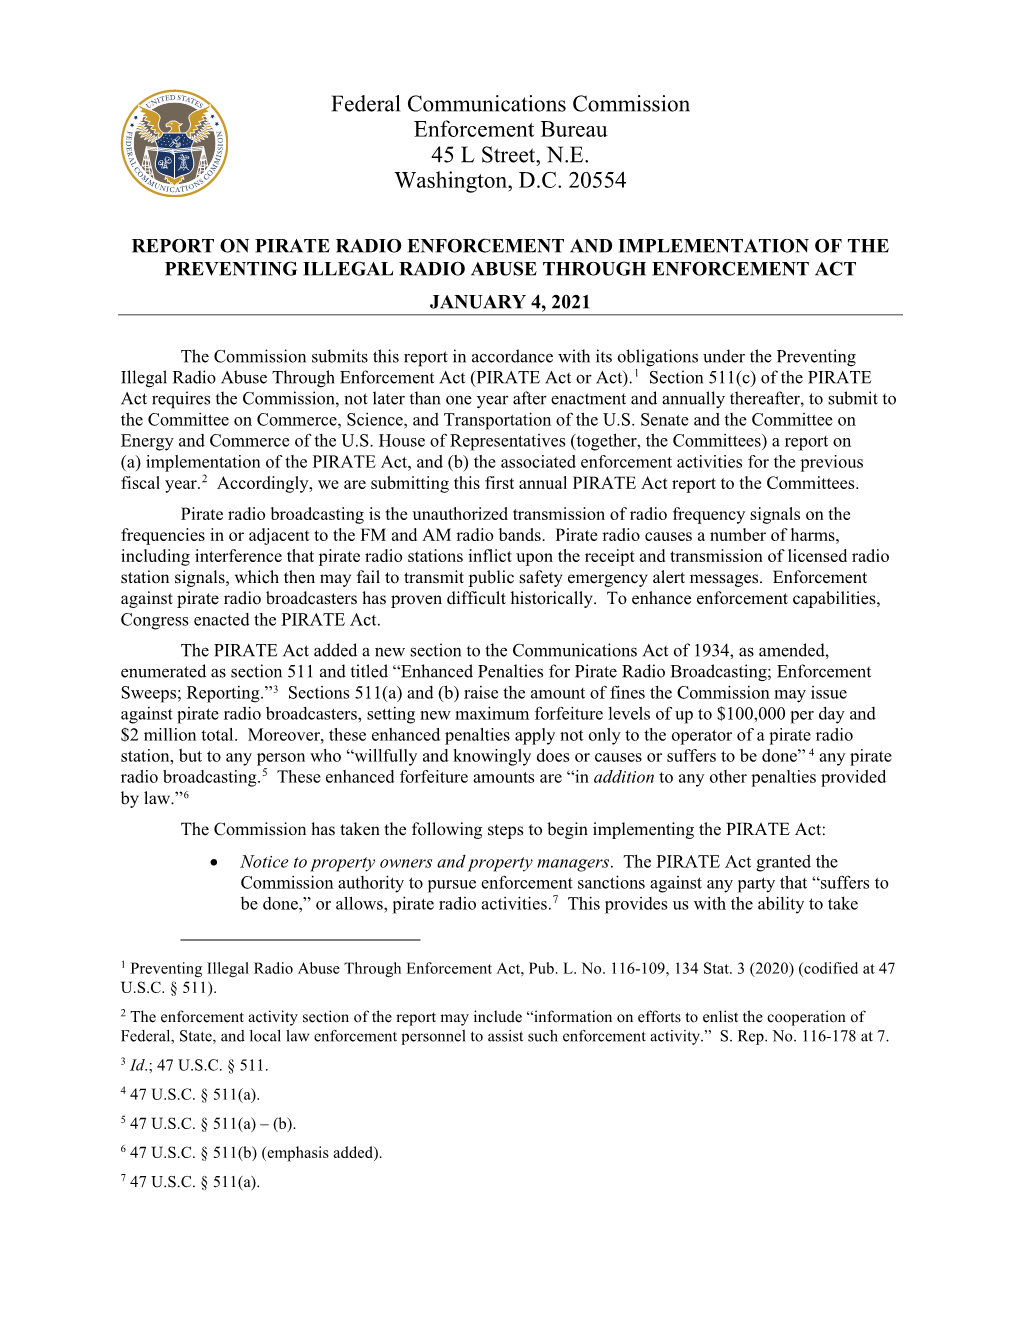 Pirate Radio Enforcement and Implementation of the Preventing Illegal Radio Abuse Through Enforcement Act January 4, 2021